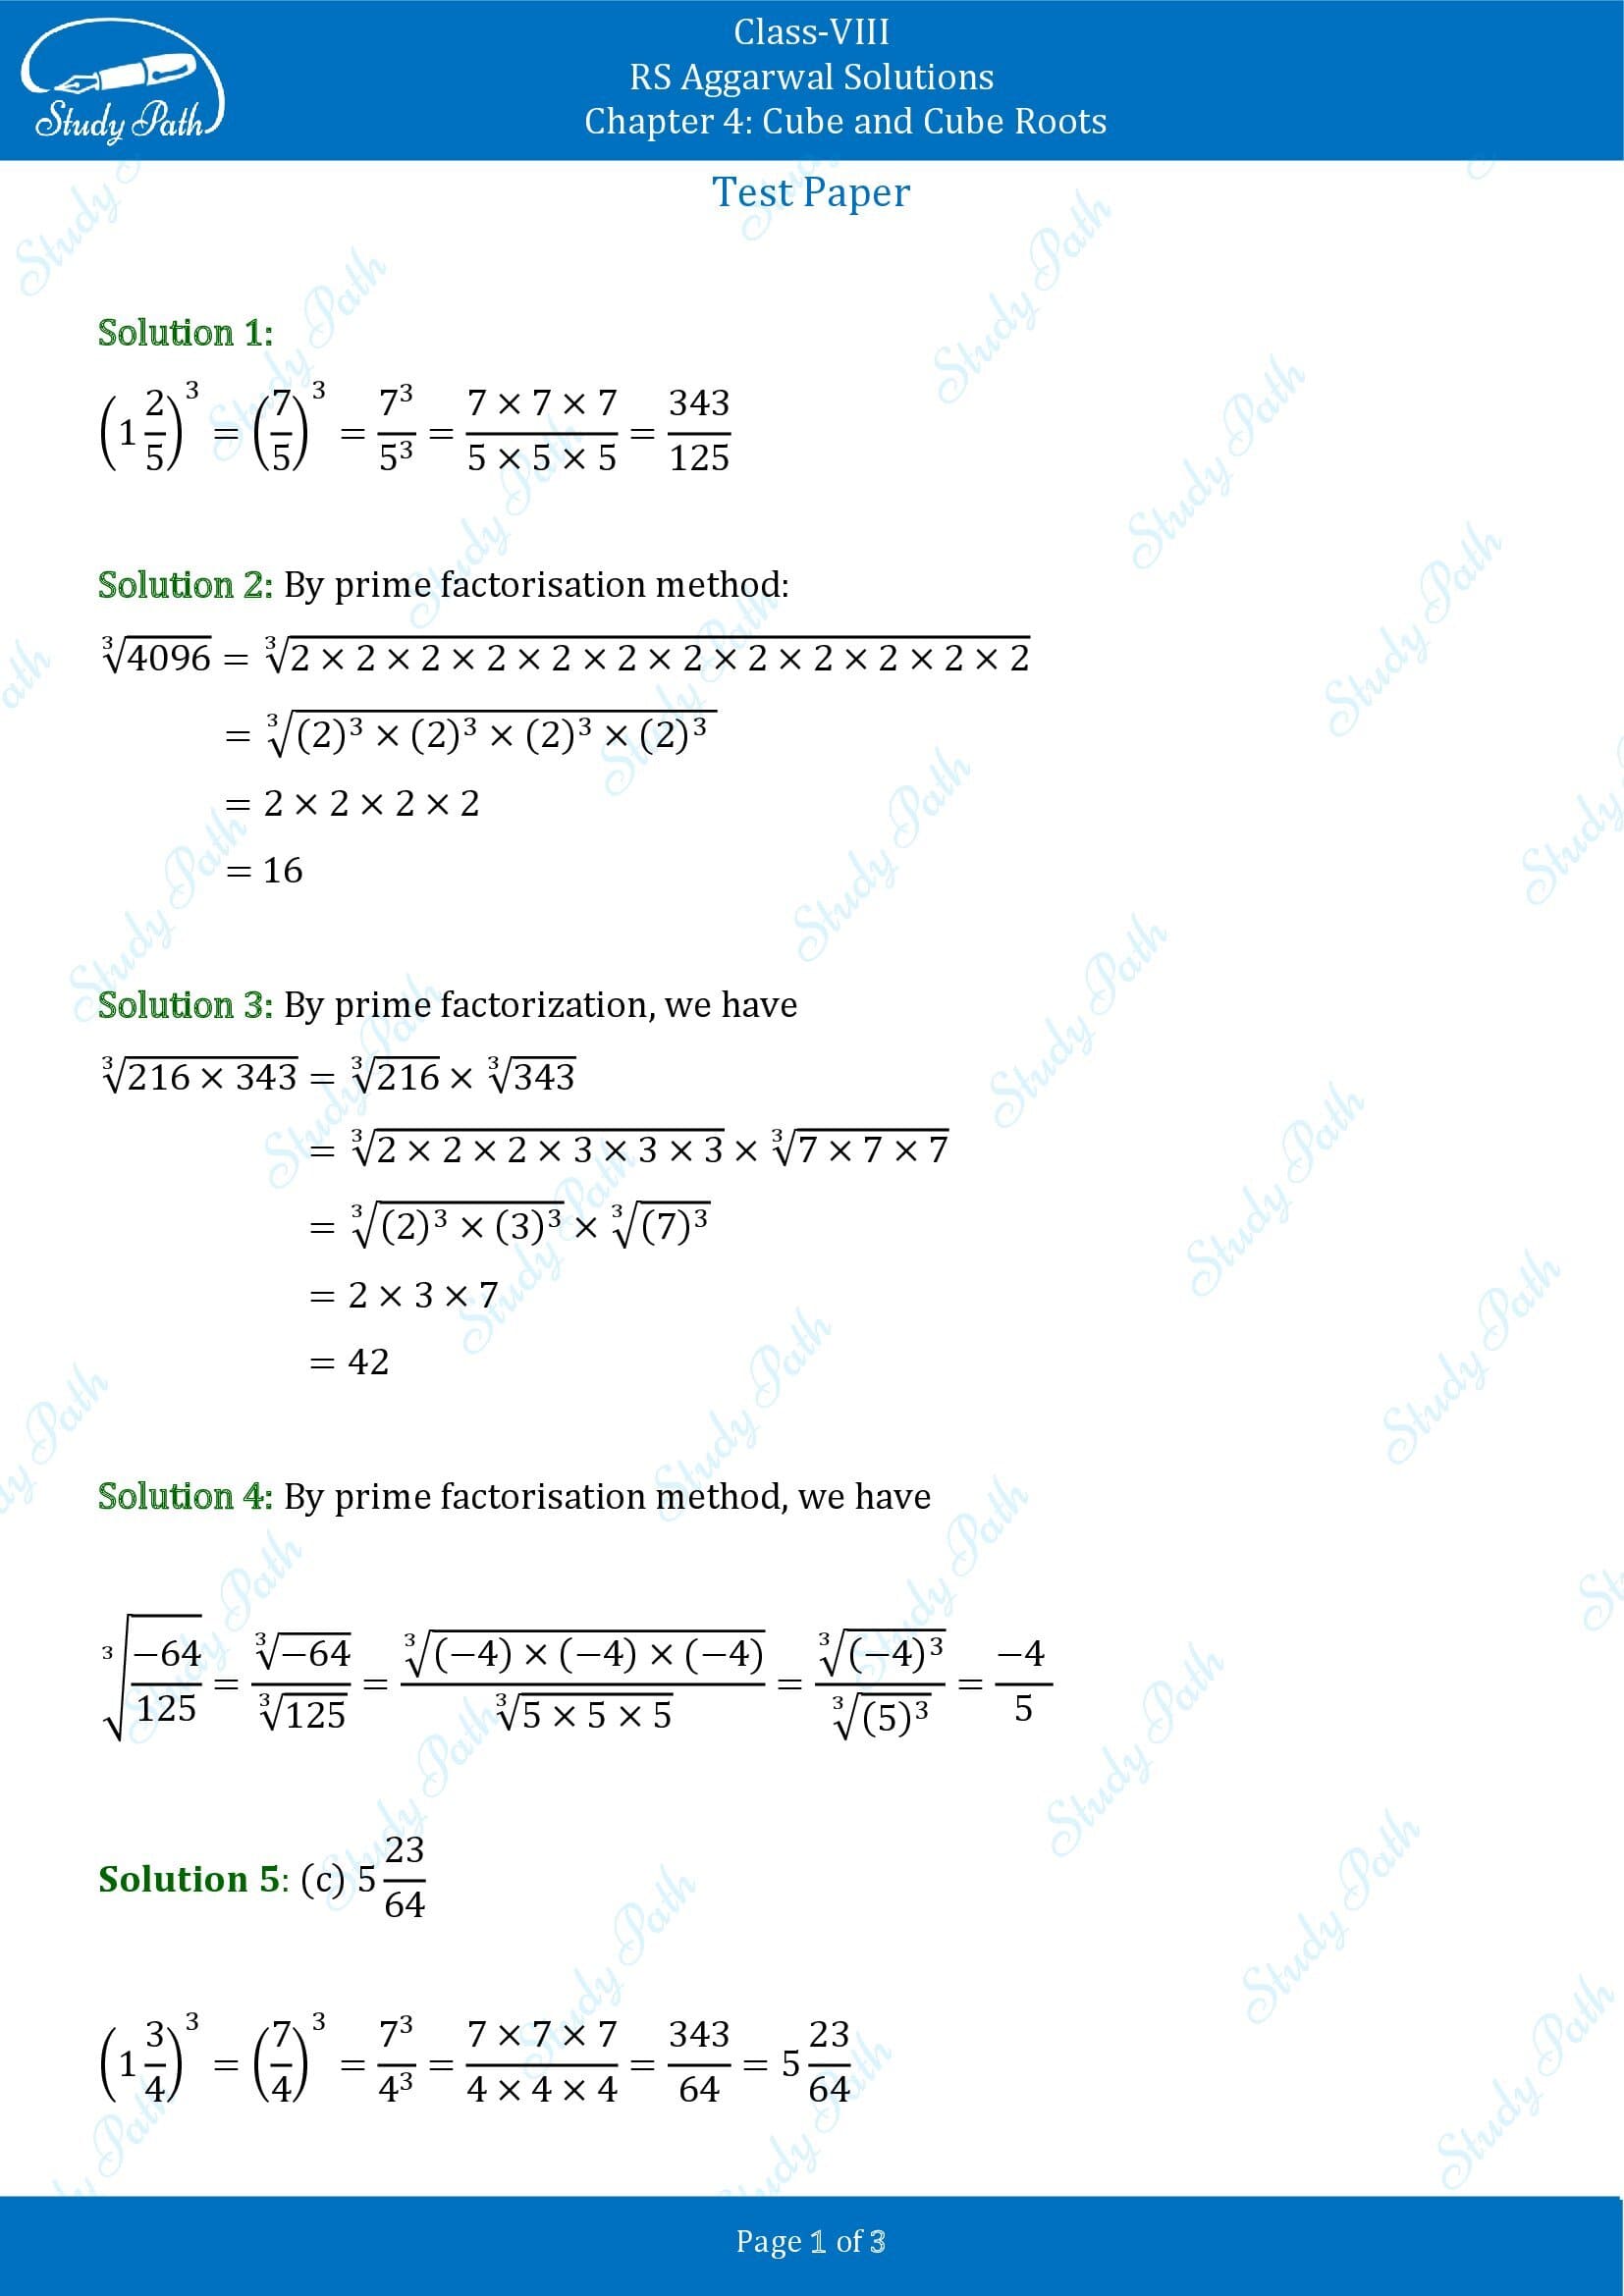 RS Aggarwal Solutions Class 8 Chapter 4 Cube and Cube Roots Test Paper 0001